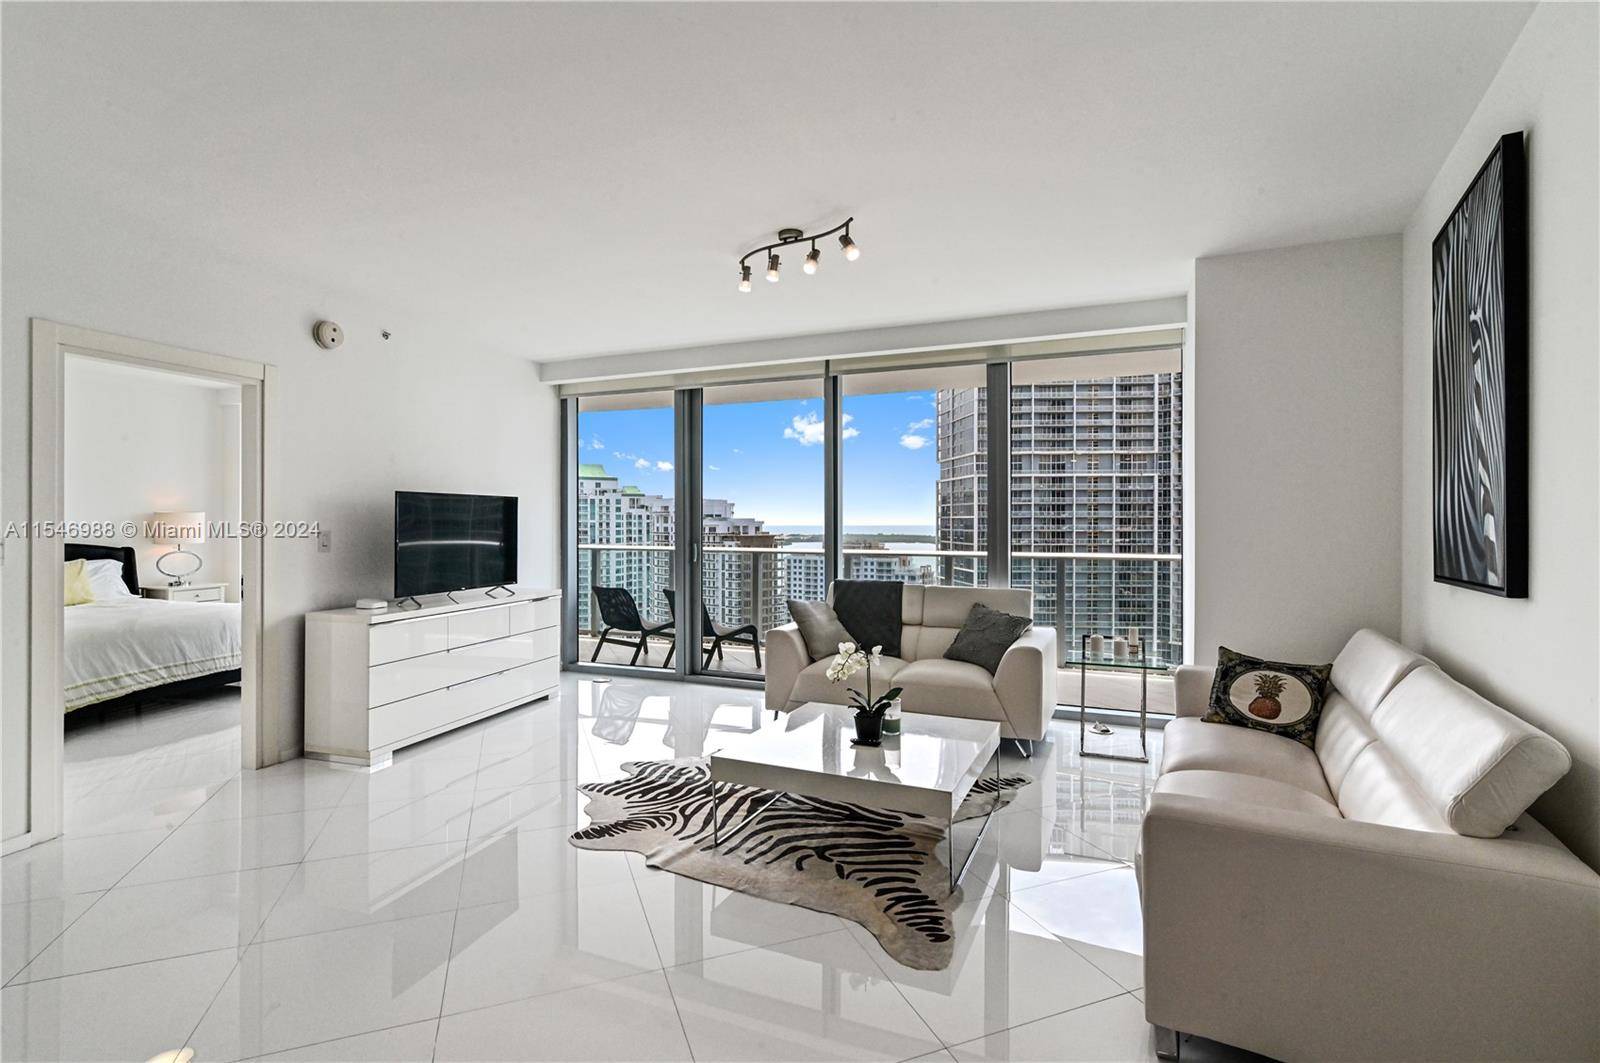 Unobstructed and breathtaking views from this unit !